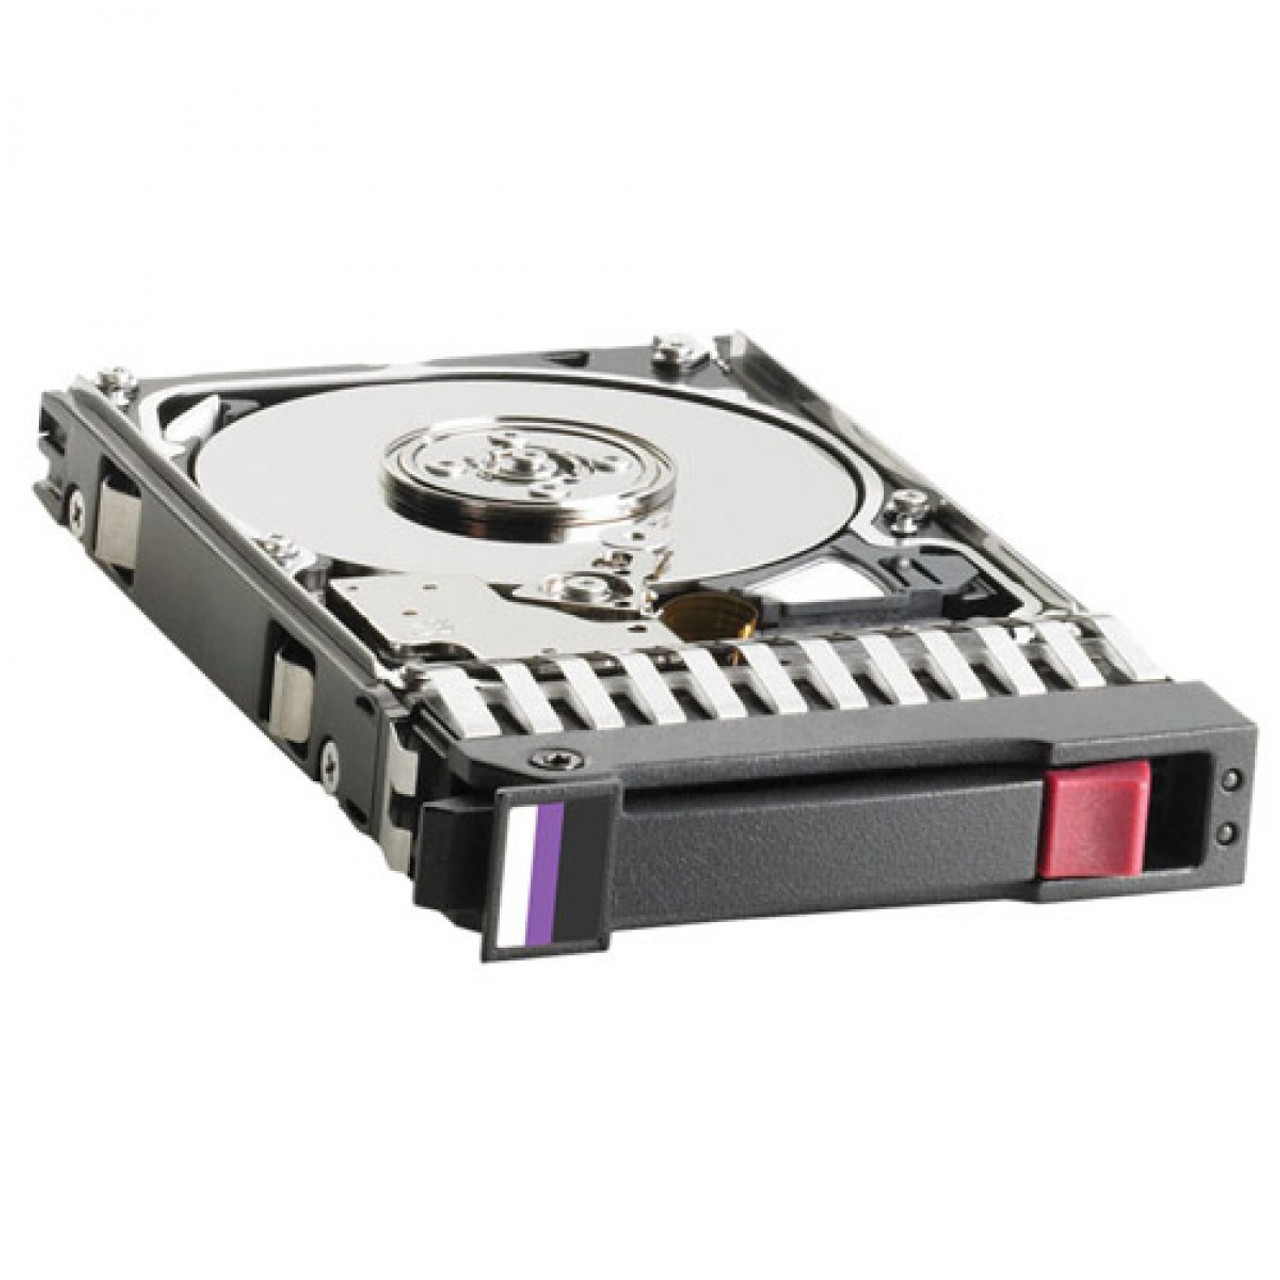 J9F49A - HP 1.8TB 10000RPM 2.5-inch SAS 12GB/s SFF 512e Enterprise Hot-pluggable Hard Drive with Tray for Msa